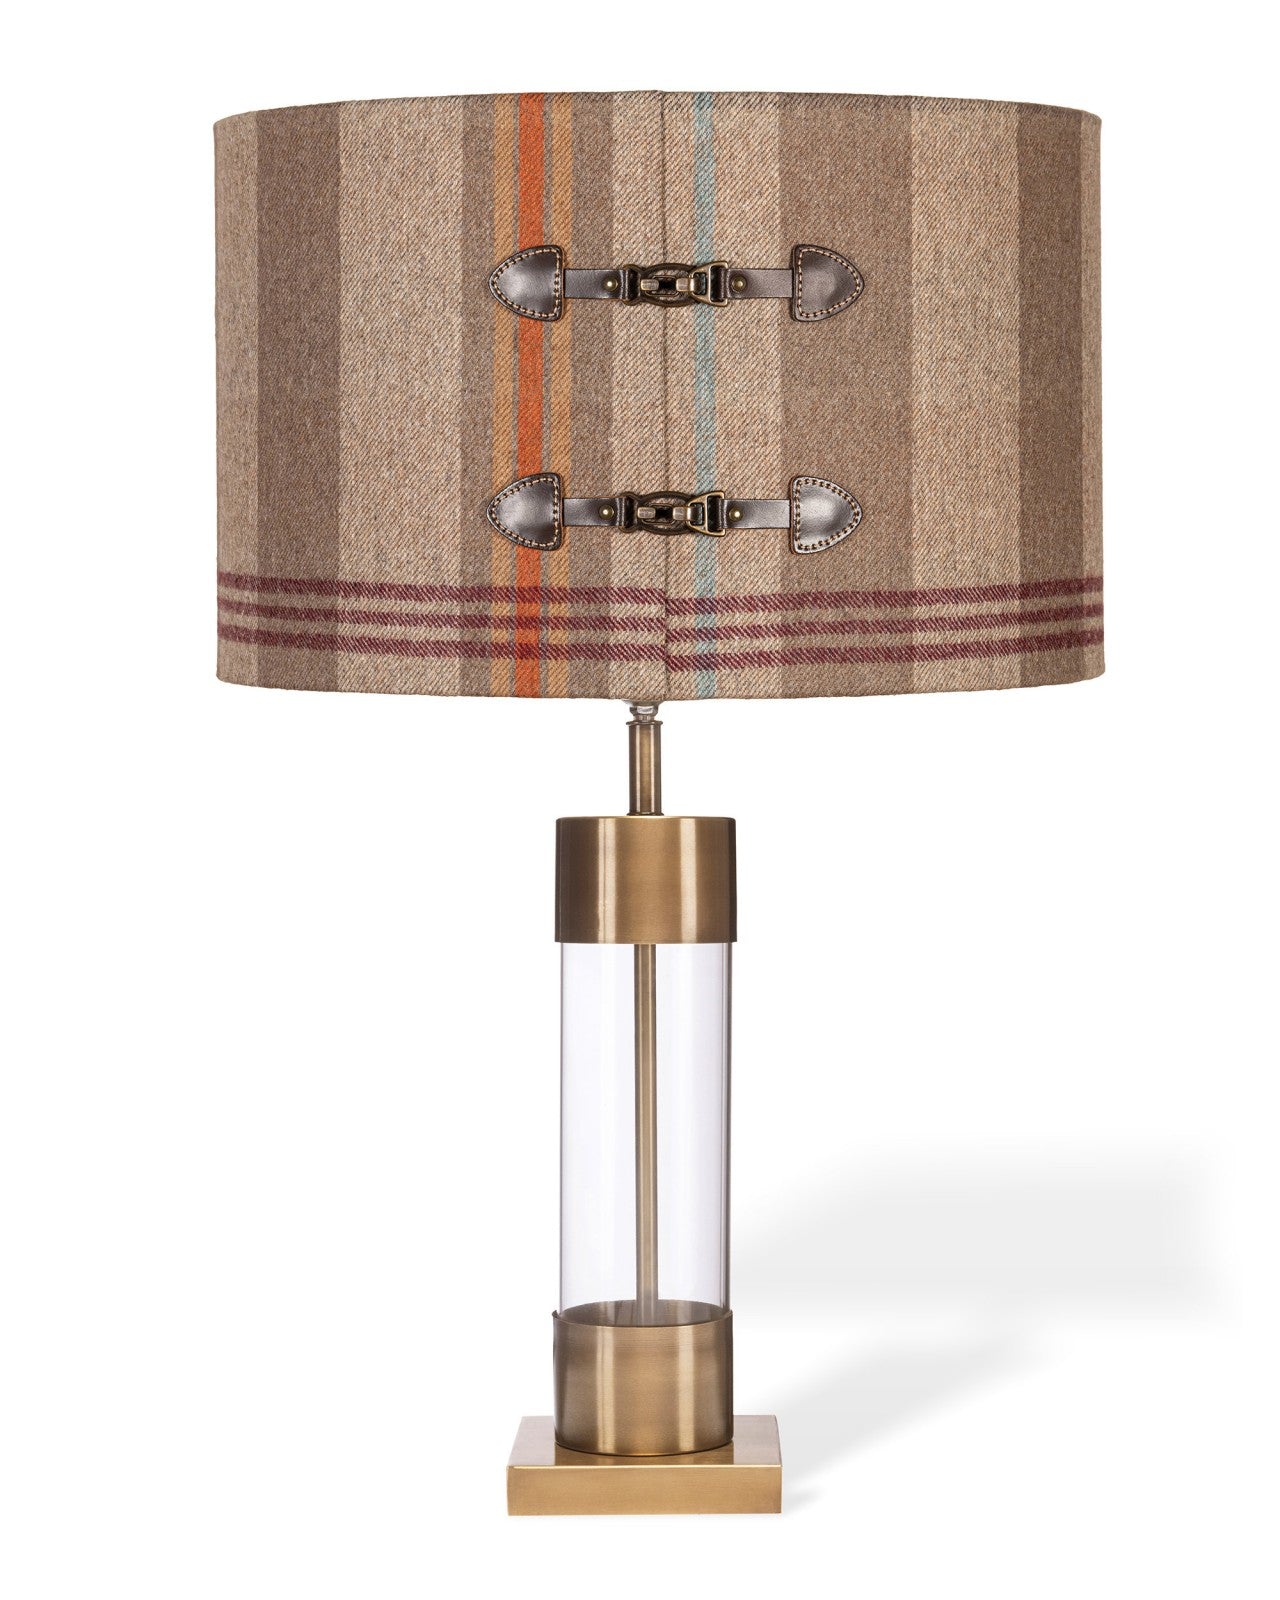 CHALET Wool Leather Buckles Lampshade_Lighting_Mindthegap